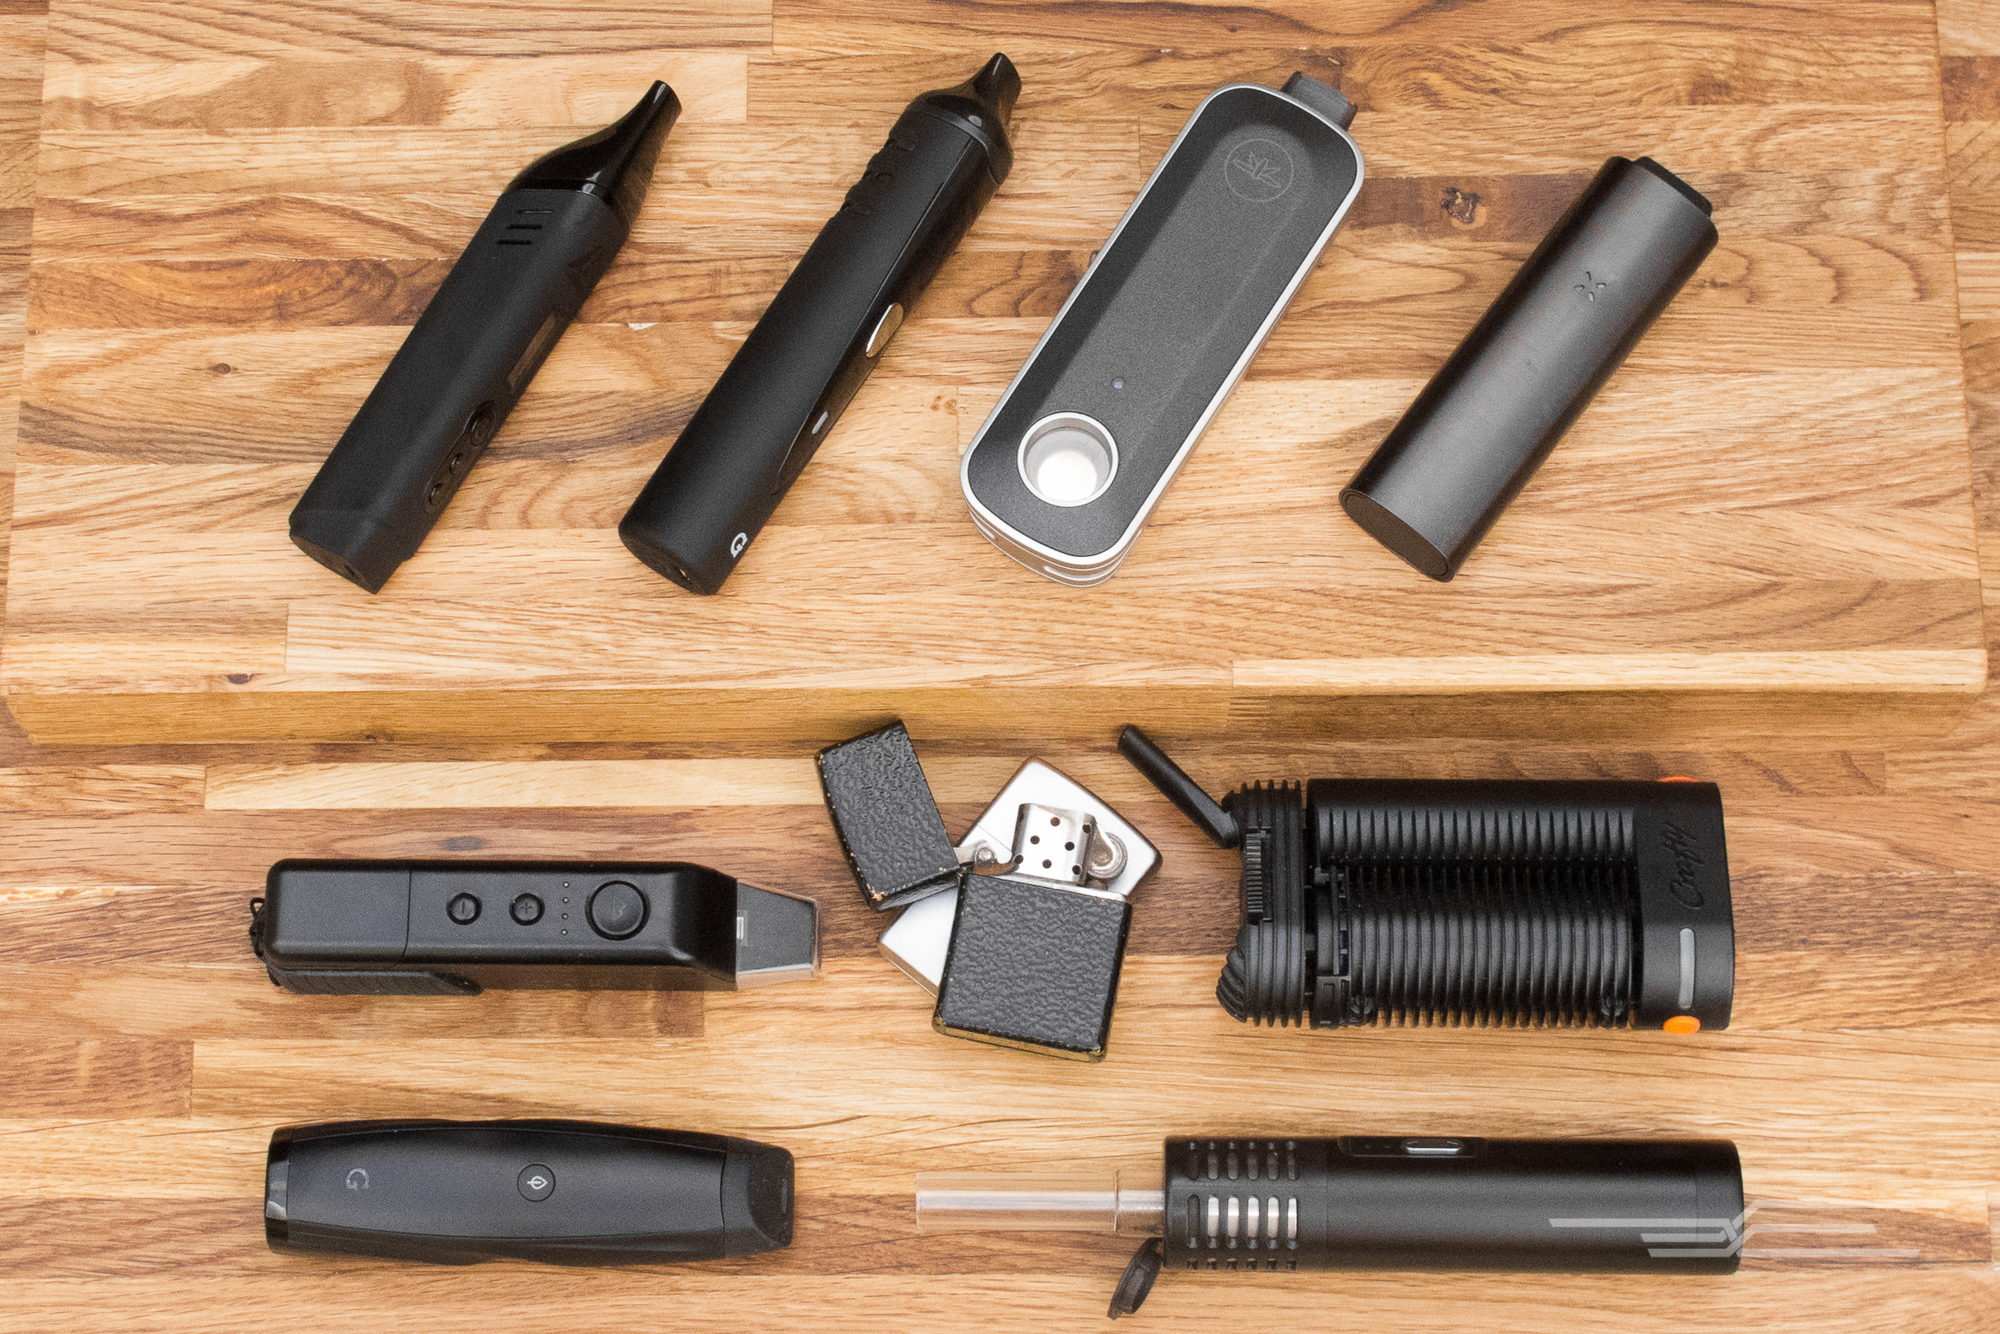 The best portable vaporizer for most people